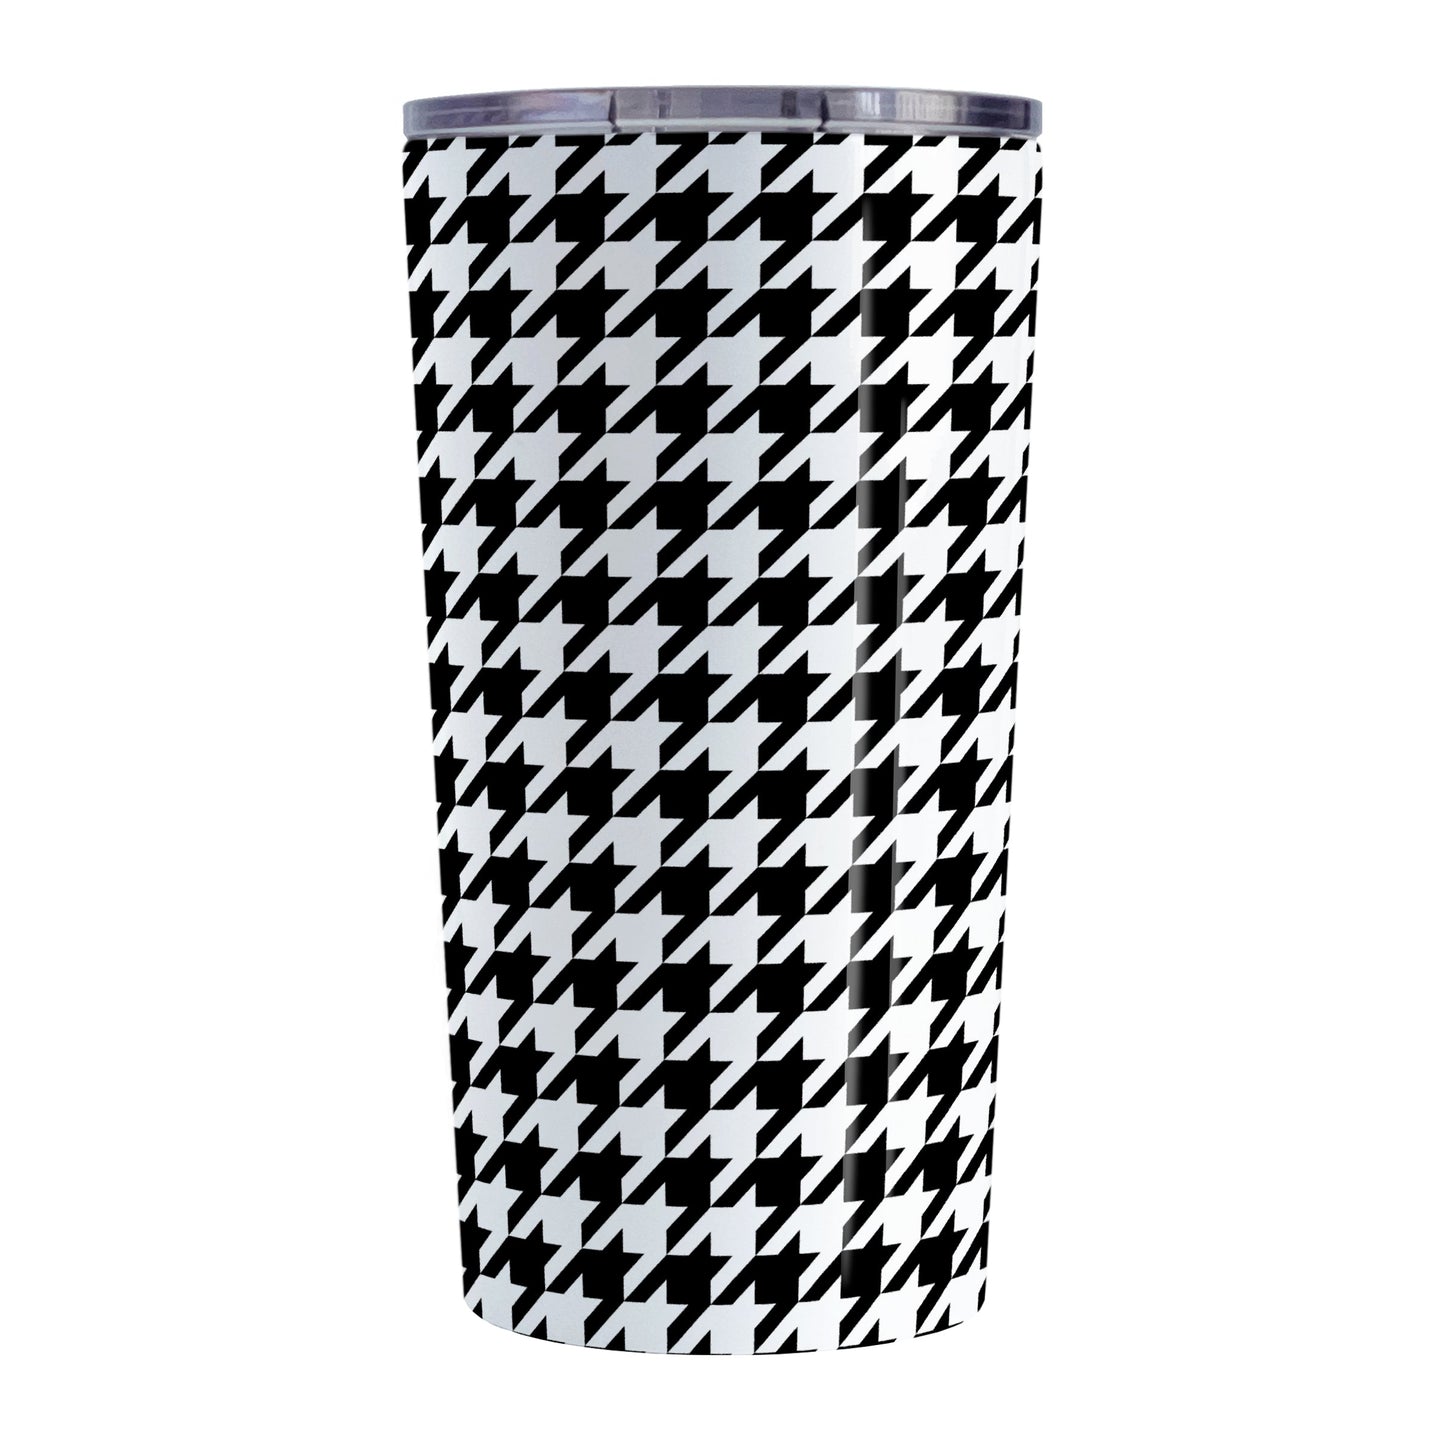 Black and White Houndstooth Tumbler Cup (20oz, stainless steel insulated) at Amy's Coffee Mugs. A tumbler cup designed with a black and white houndstooth (dogtooth) pattern that wraps around the cup.